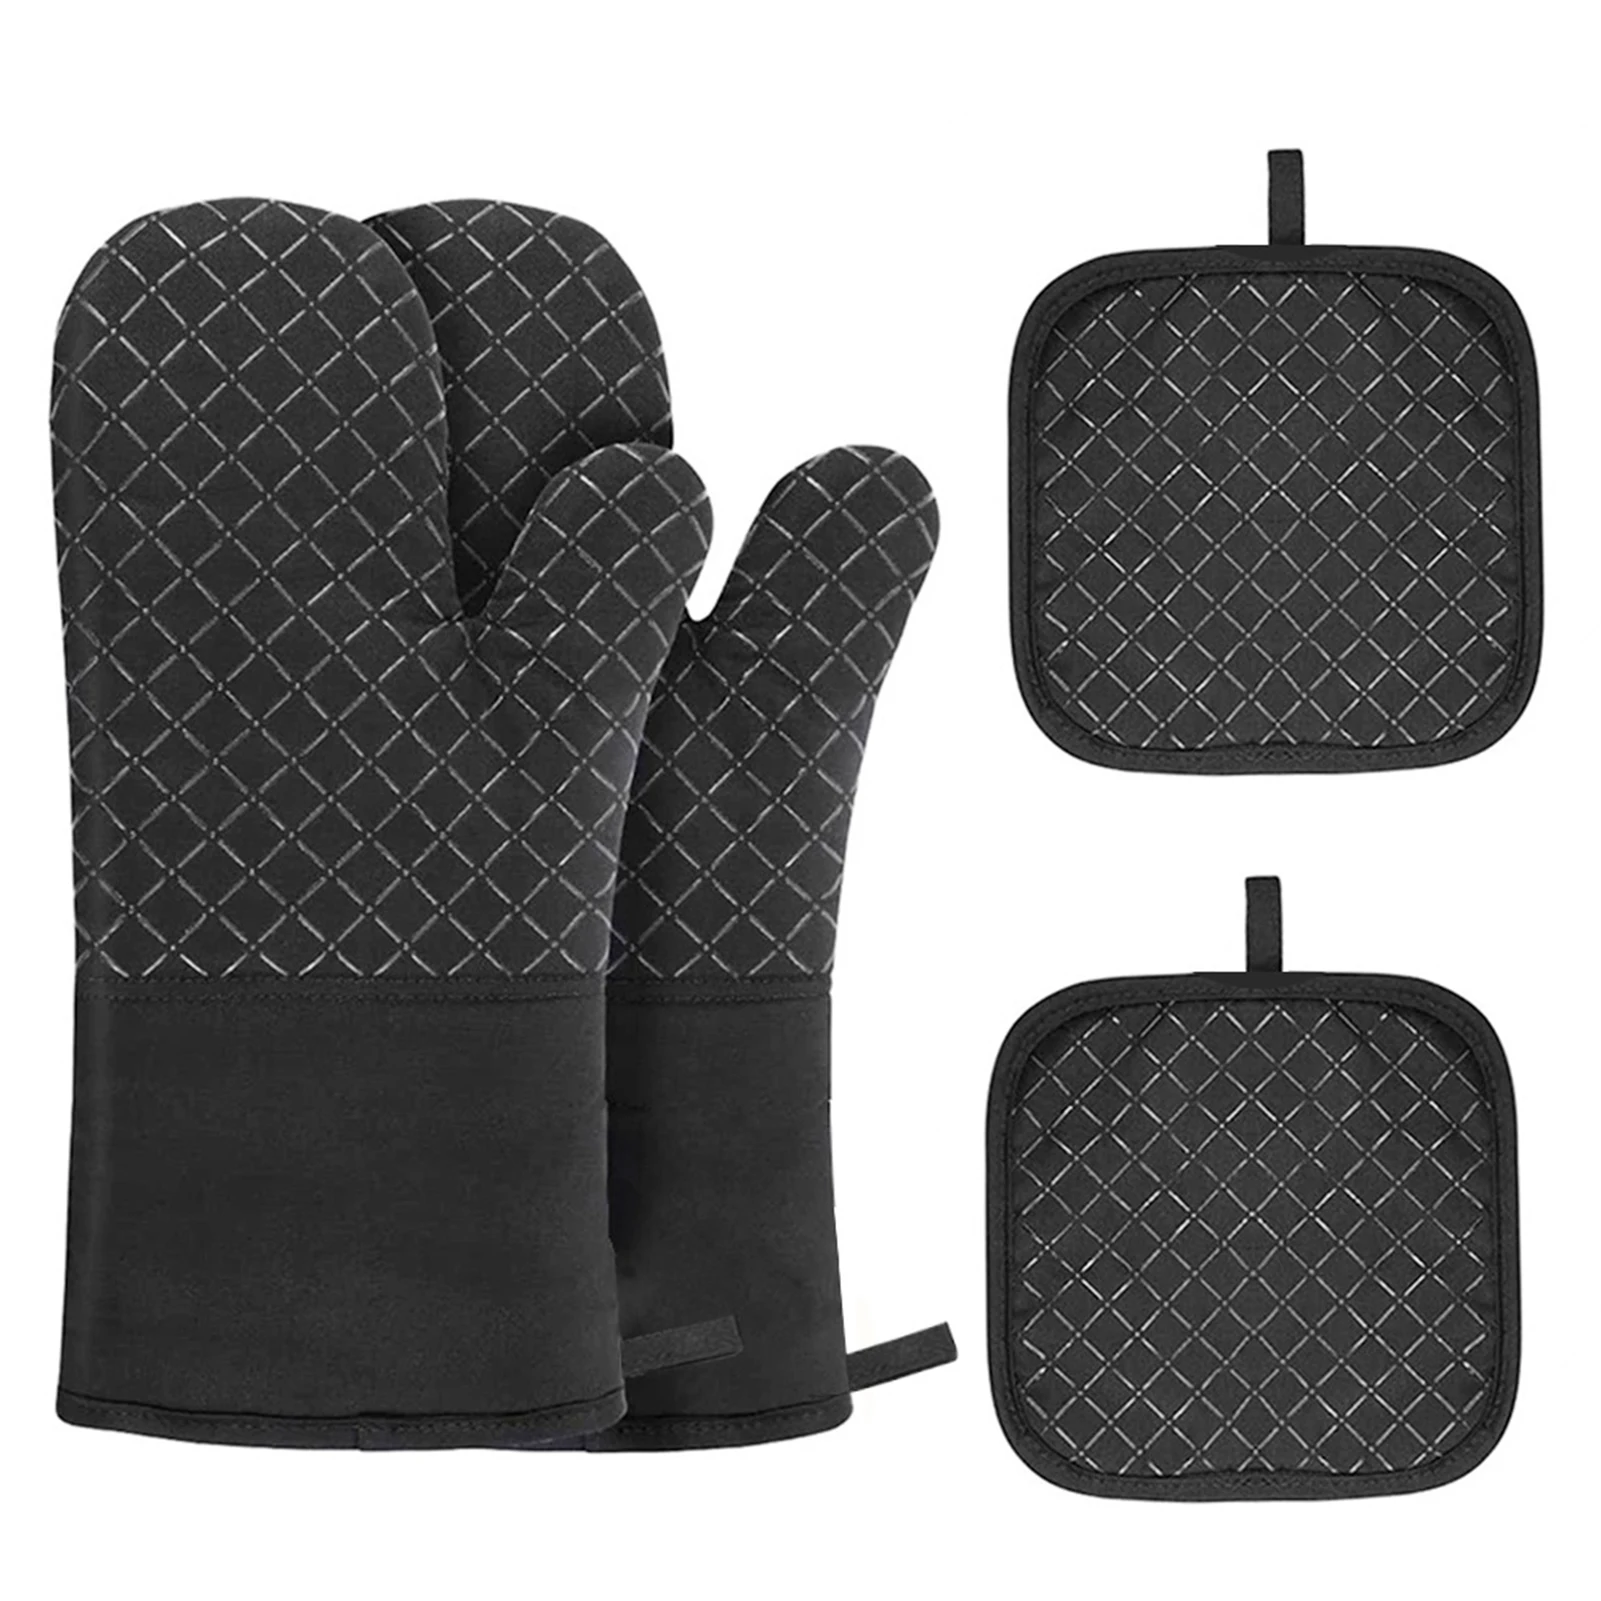 https://ae01.alicdn.com/kf/S82737c1a3bd143659e18937651f087bbu/Oven-Mitts-and-Pot-Holders-4pcs-Set-Heat-Resistant-Oven-Gloves-and-Hot-Pads-Potholders-for.jpg